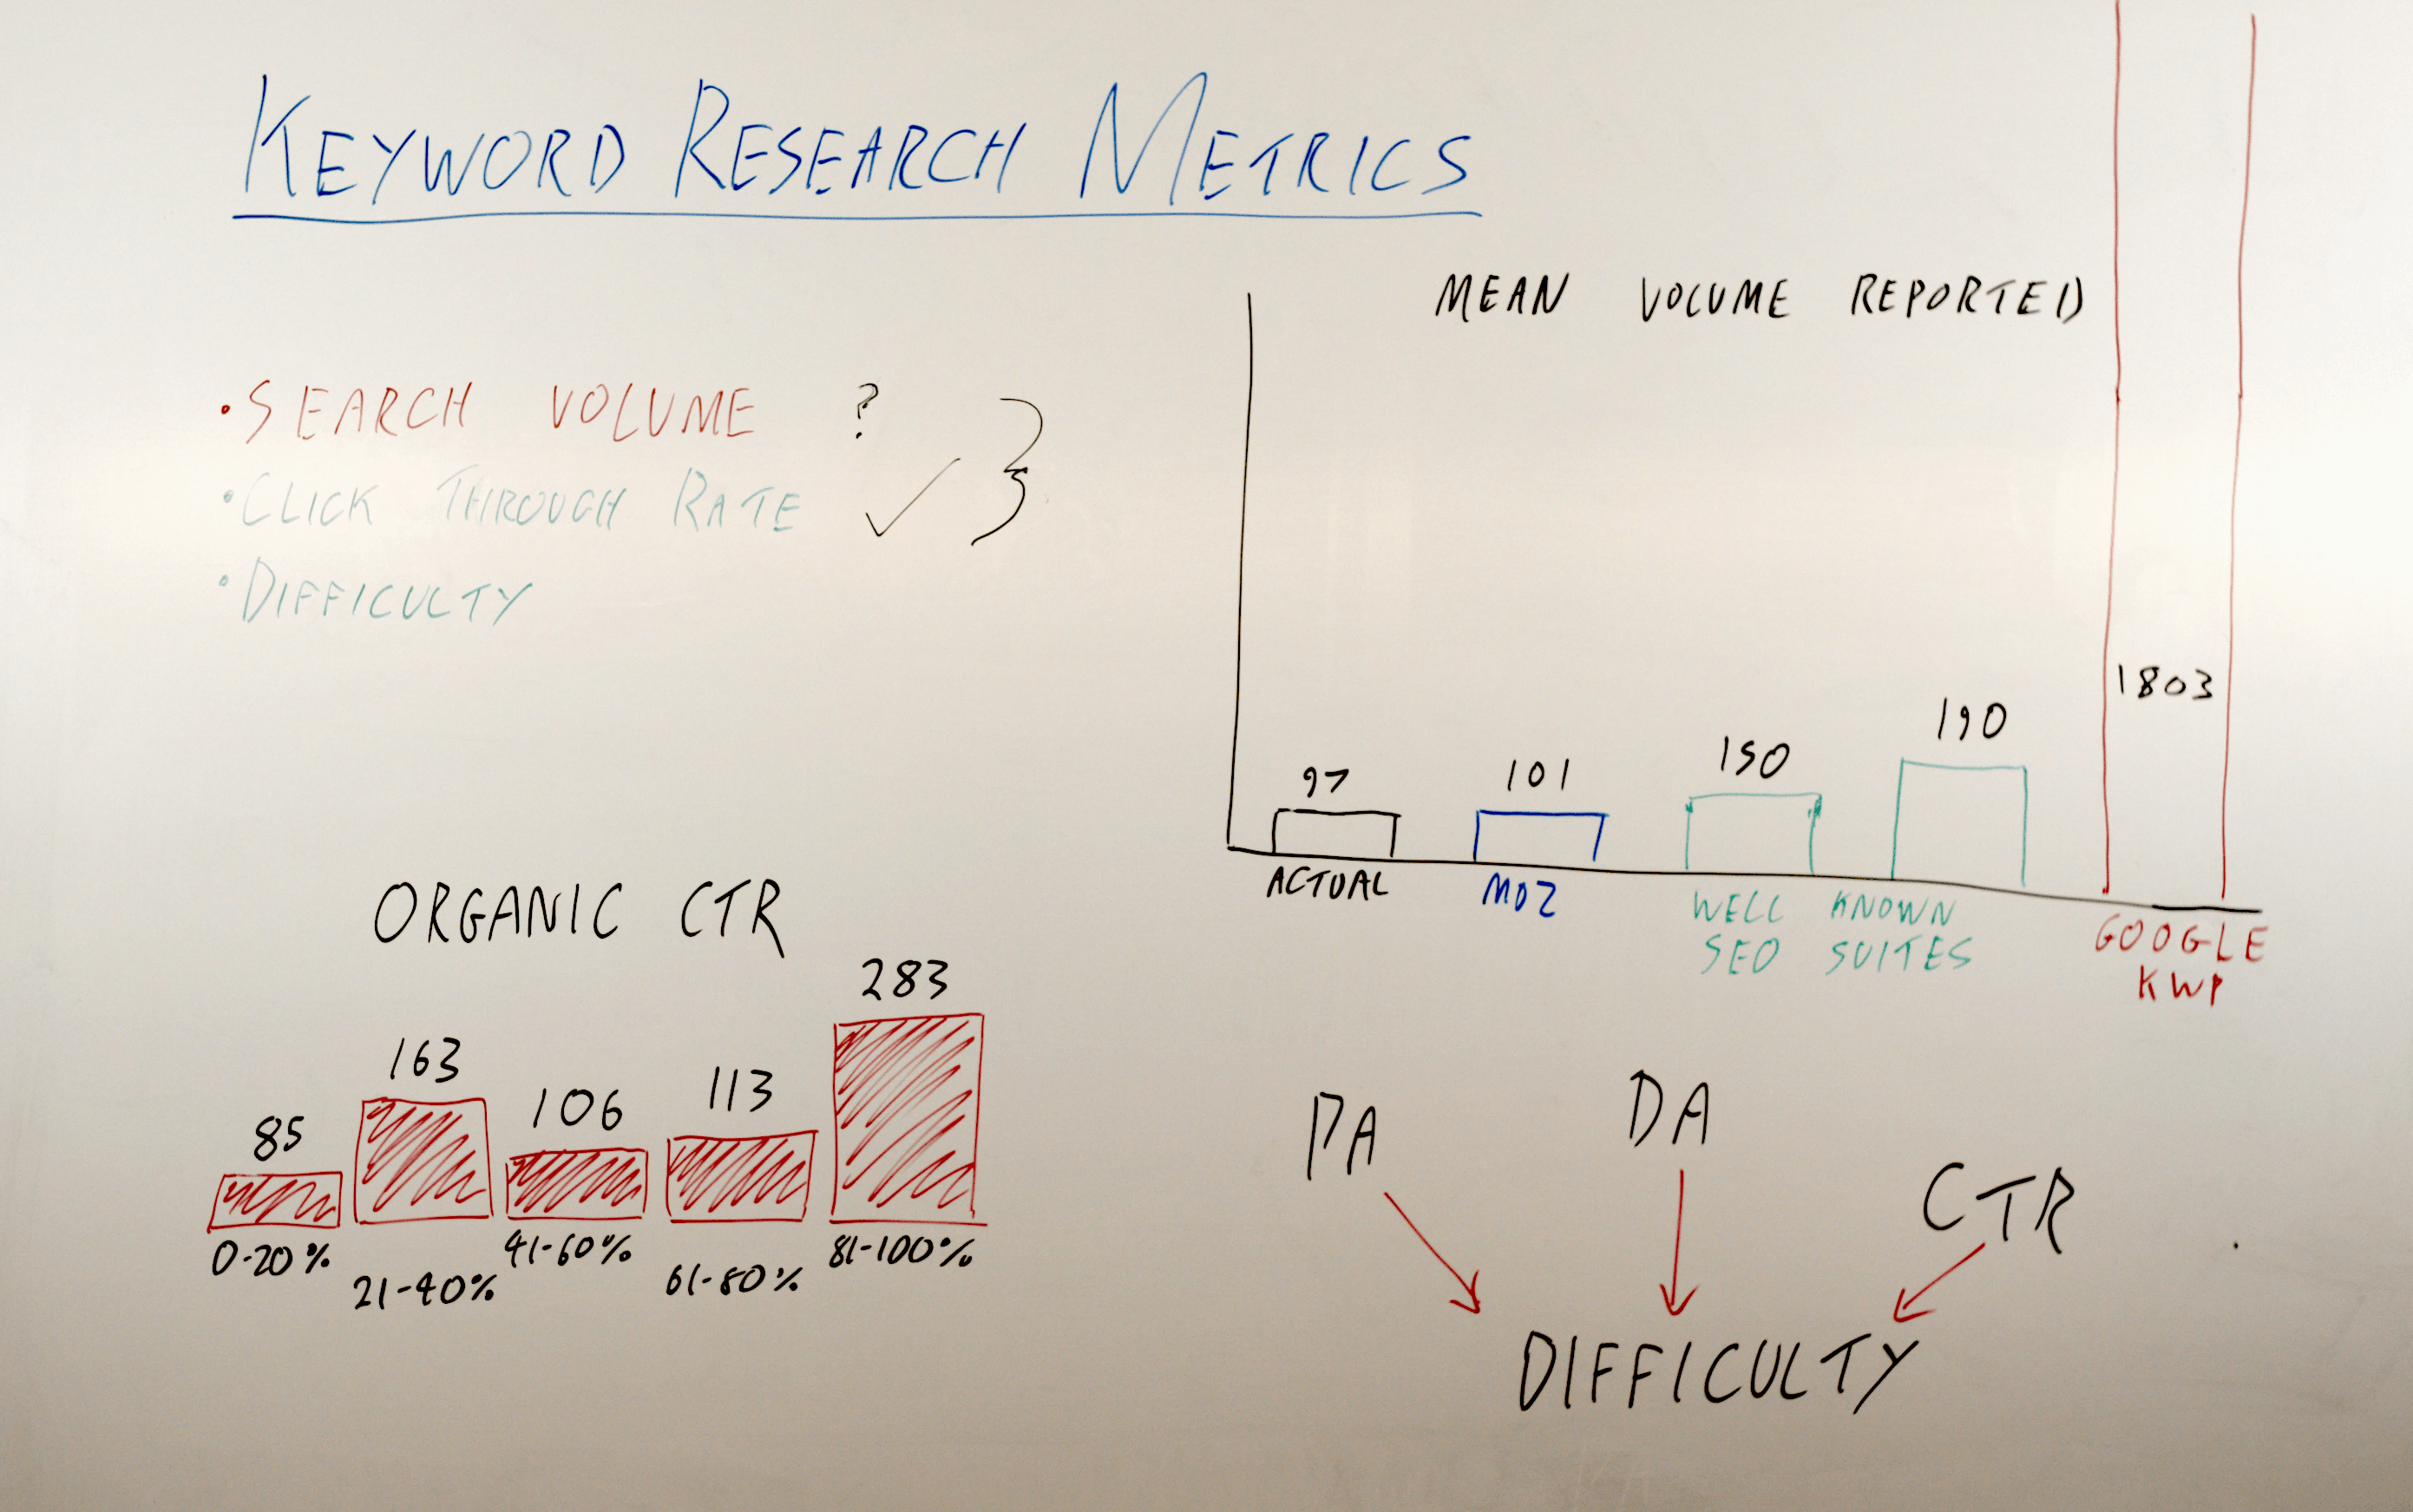 whiteboard outlining tips for measuring keyword research efforts